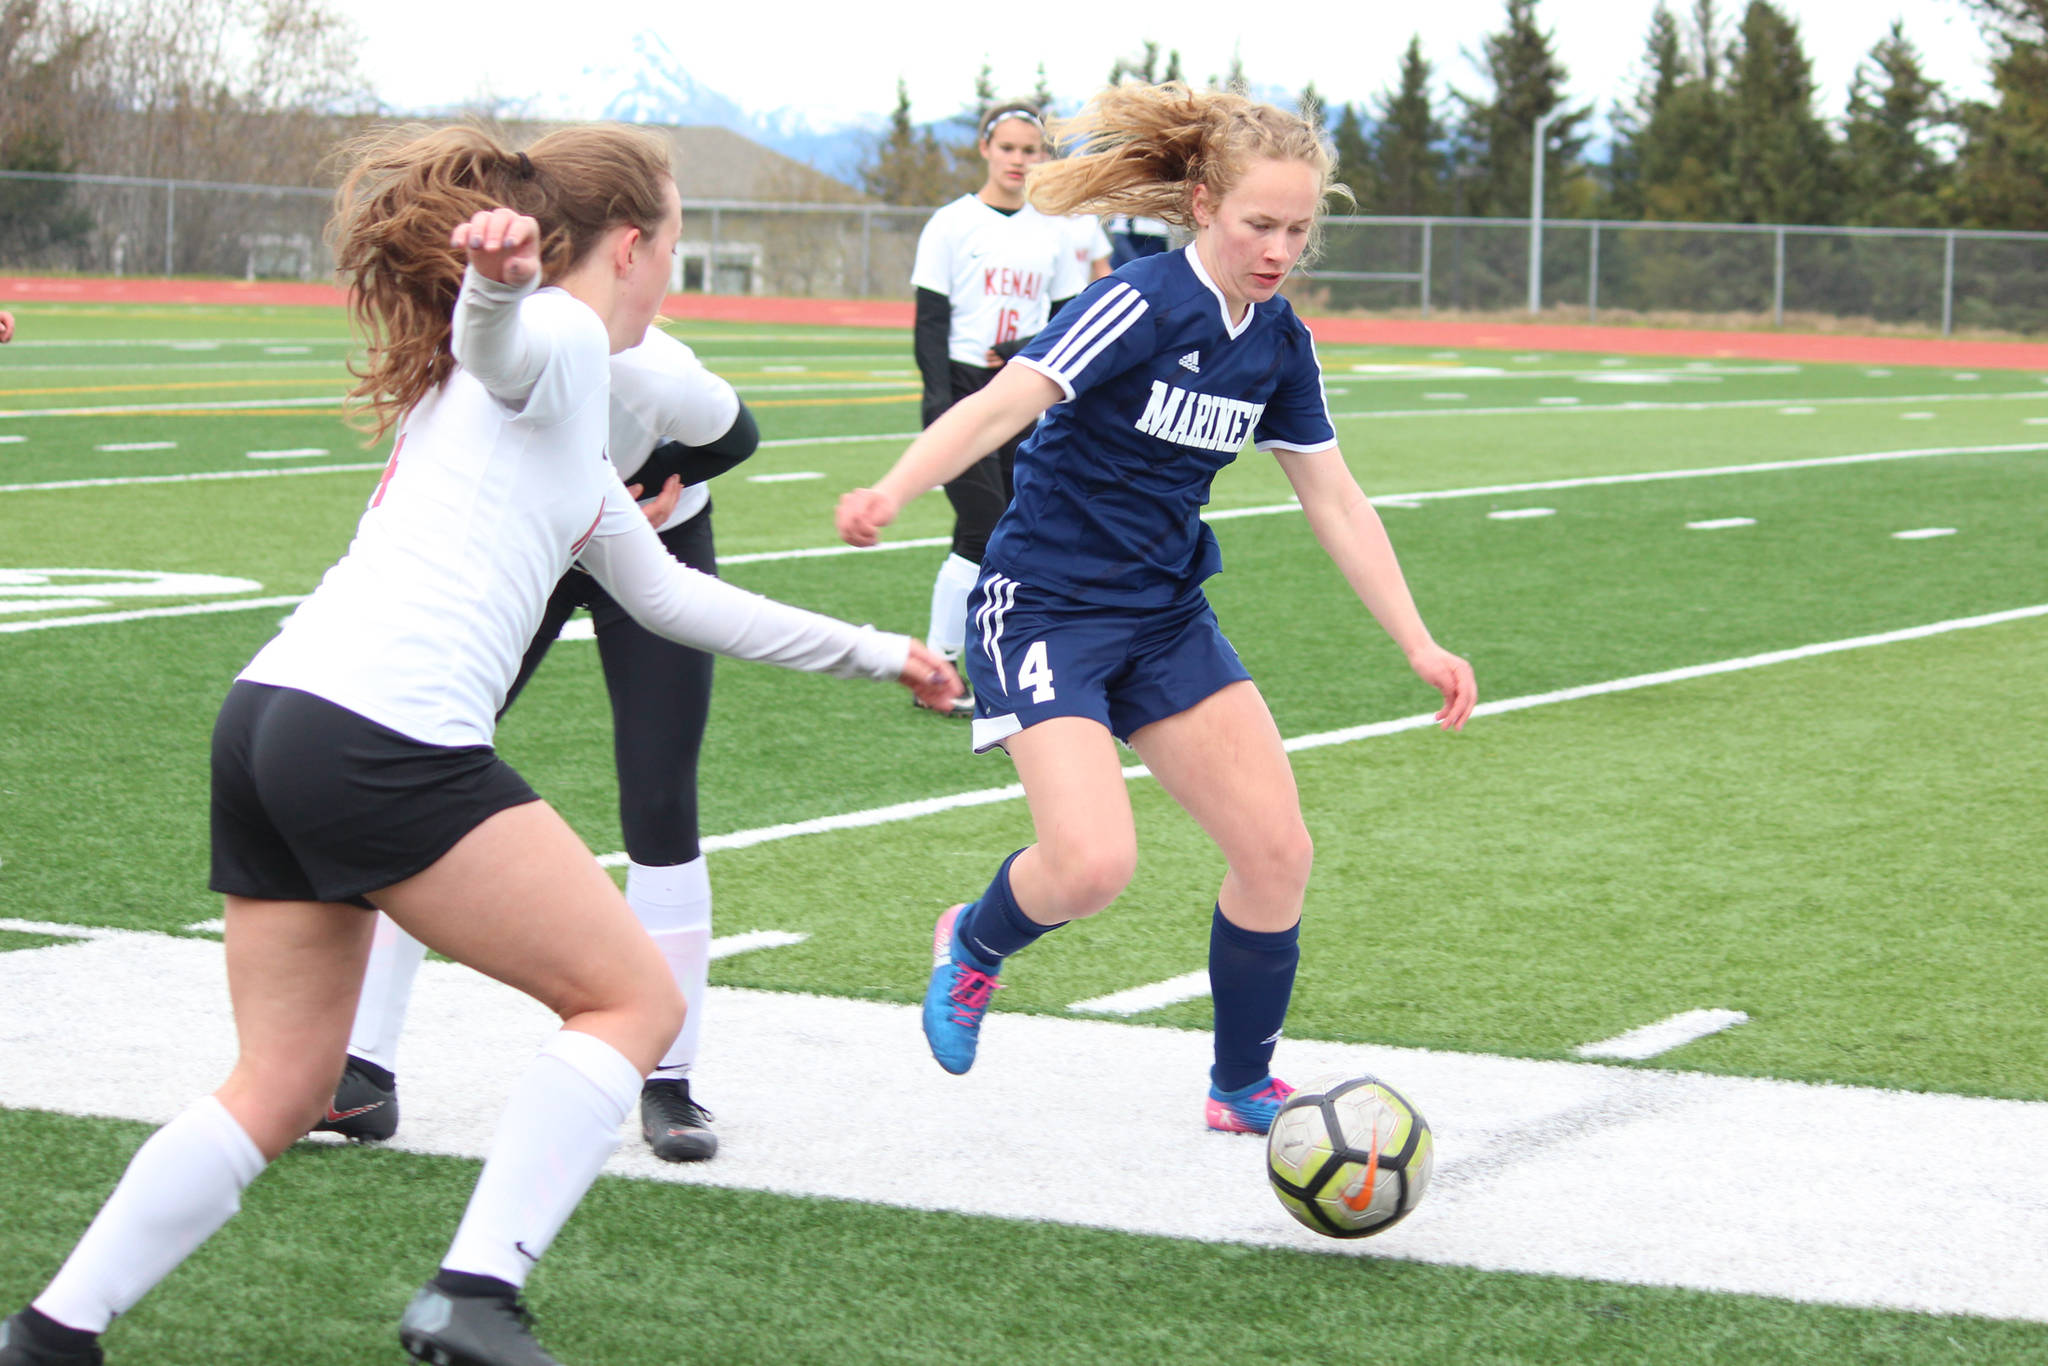 Homer’s Jessica Sonnen rushes to the ball along with Kenai’s Abigail Schneiders during a Thursday, May 9, 2019 soccer game at Homer High School in Homer, Alaska. (Photo by Megan Pacer/Homer News)